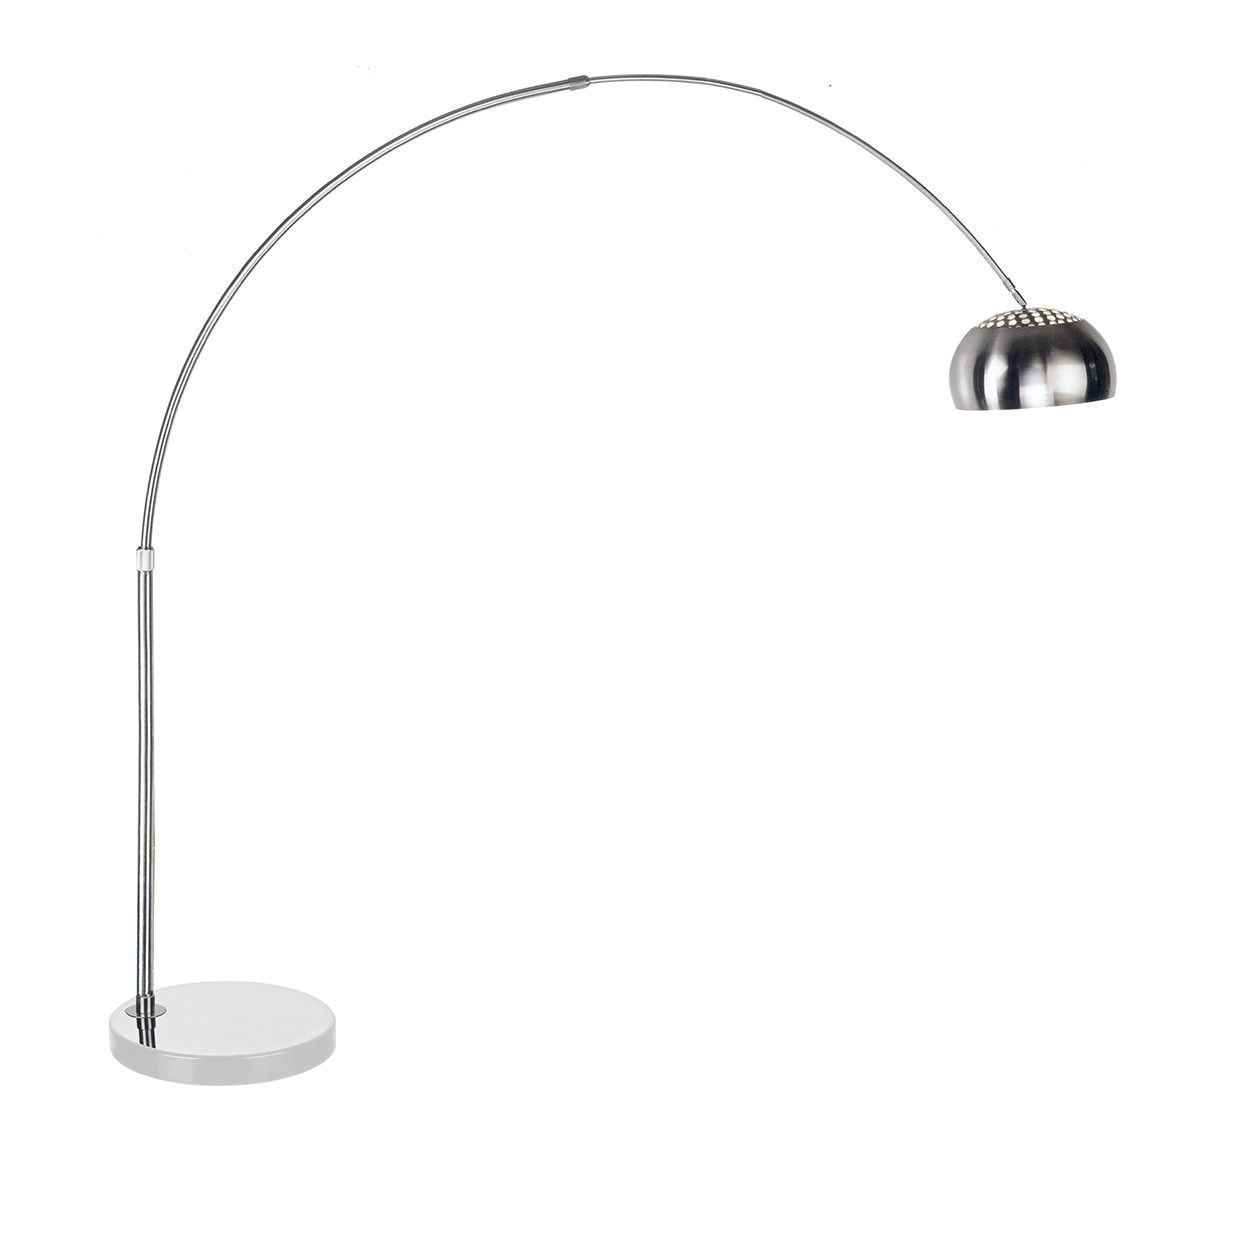 Arco Floor Lamp Mid Century Modern Reproduction Arco Floor Lamp Round White Marble